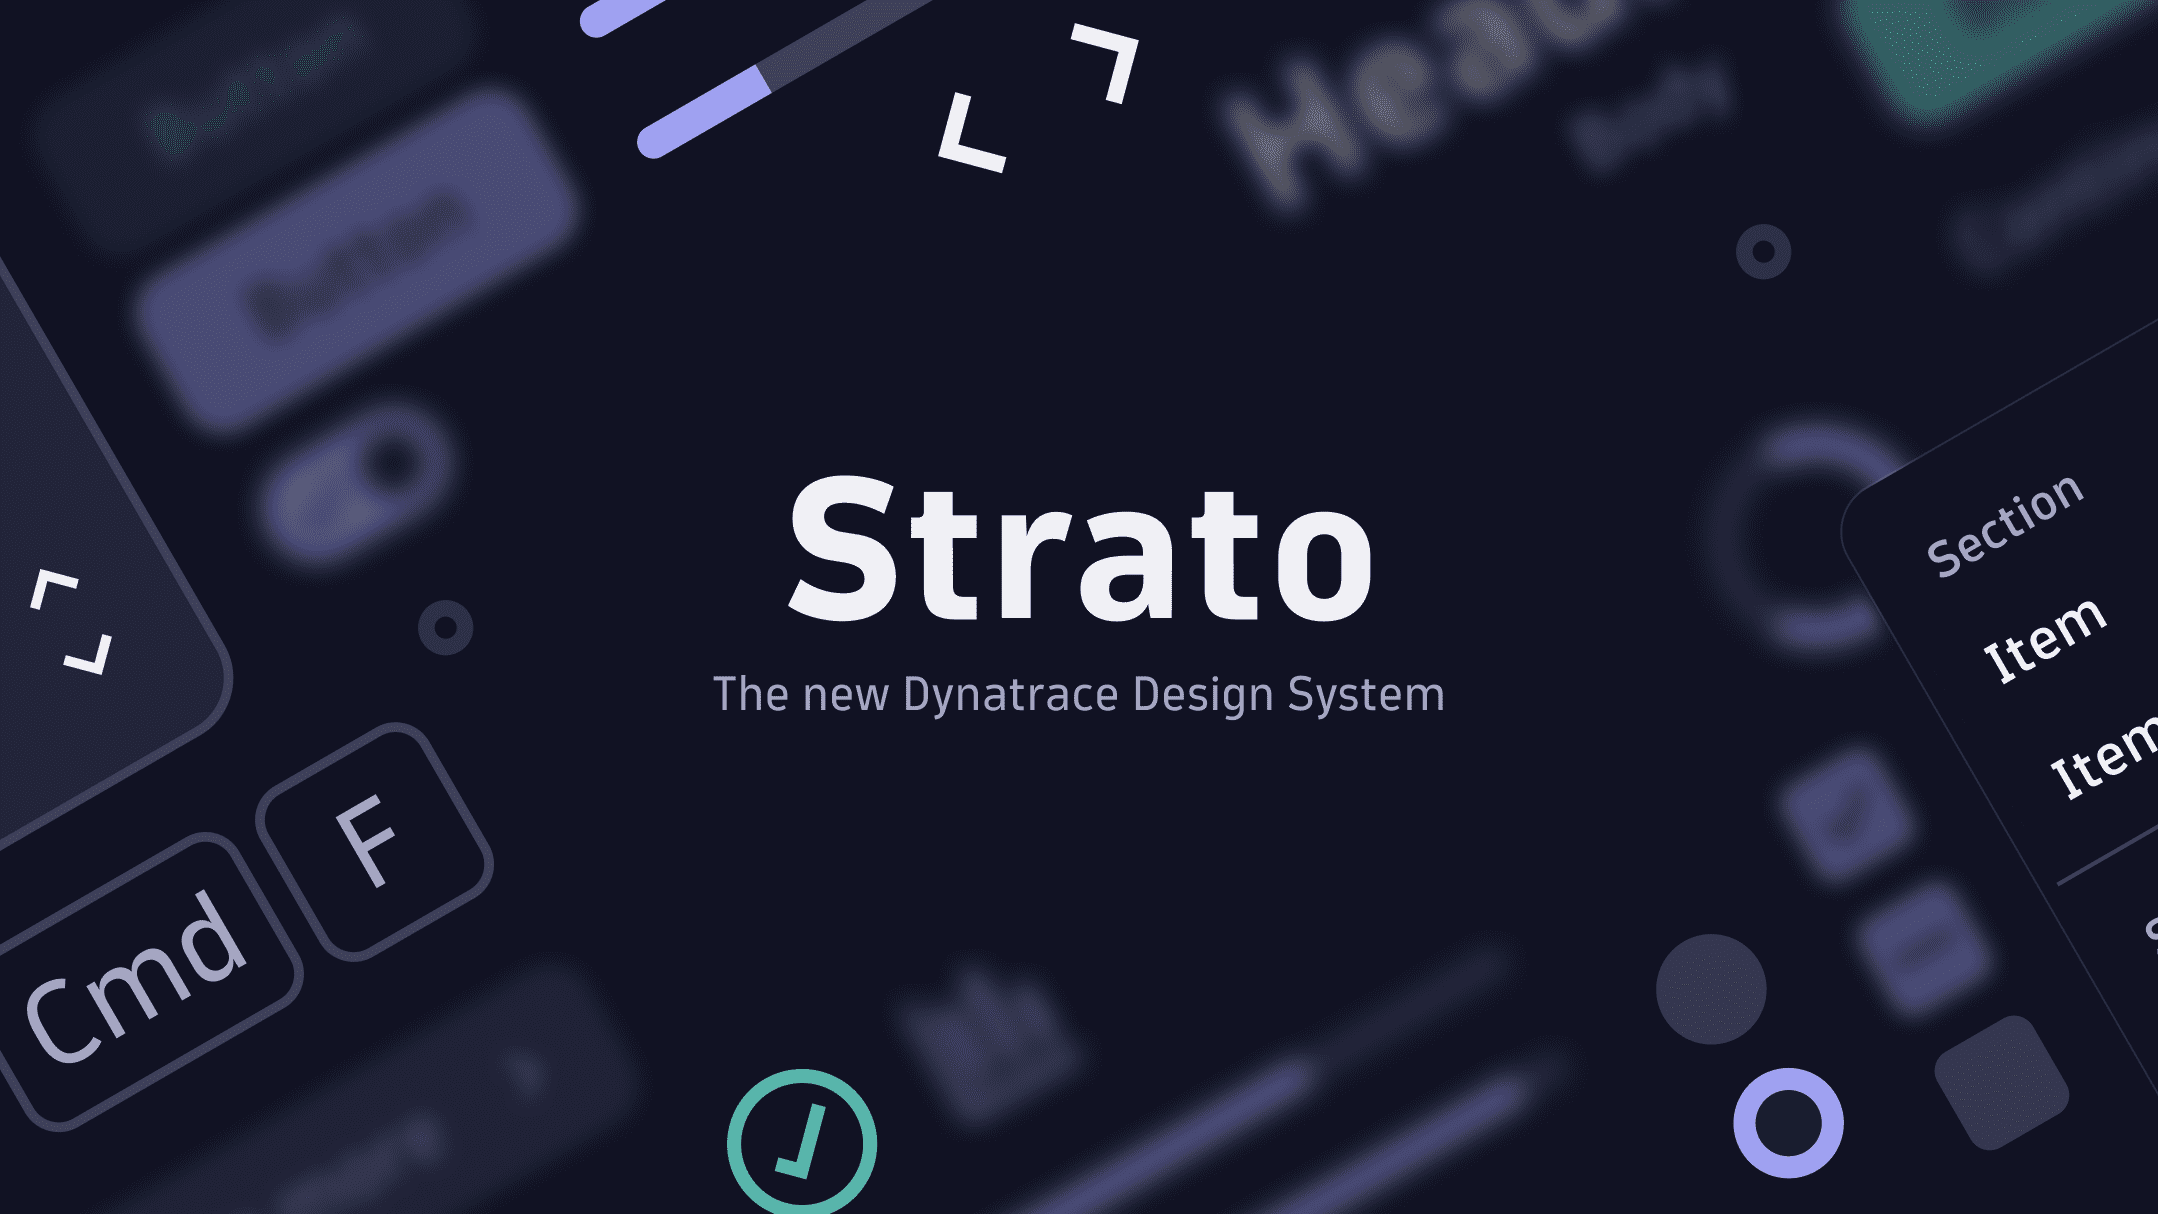 A presentational overview of the Strato Design System